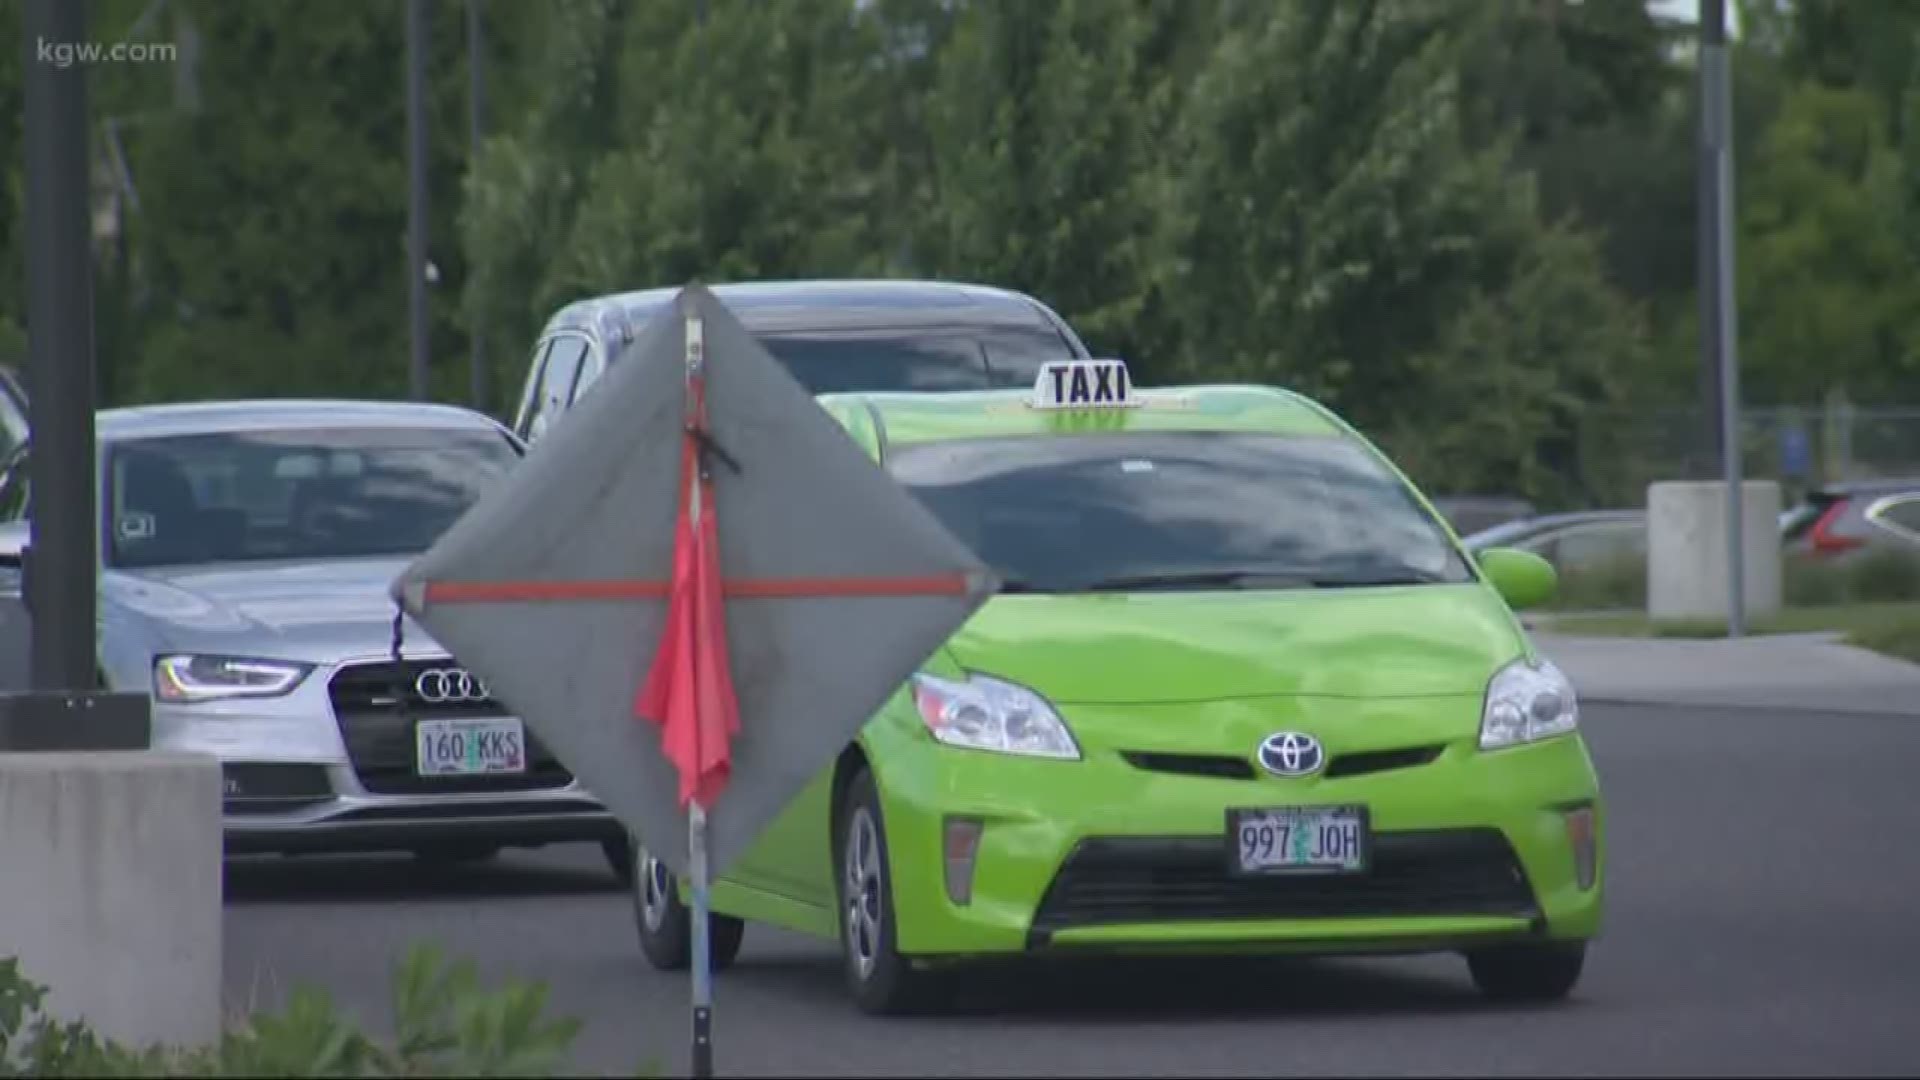 Portland International Airport new rideshare system helps relieve congestion in the terminal but congestion in the cell phone waiting area continues.